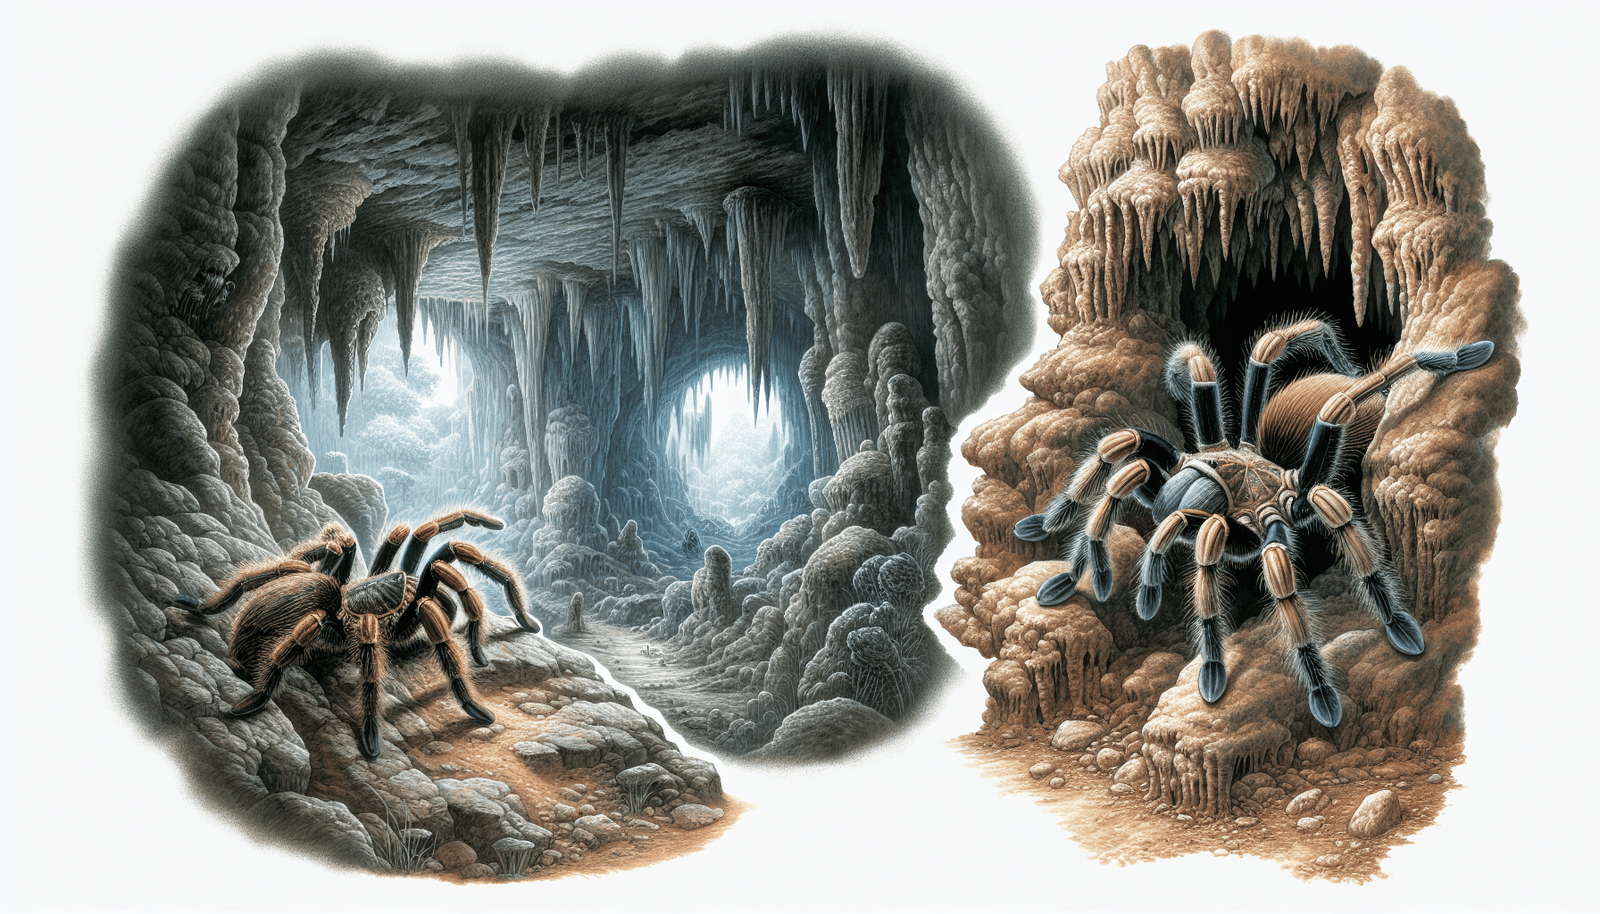 Can You Recommend Some Cave-dwelling Tarantula Species That Are Suitable For Exotic Pet Enthusiasts?